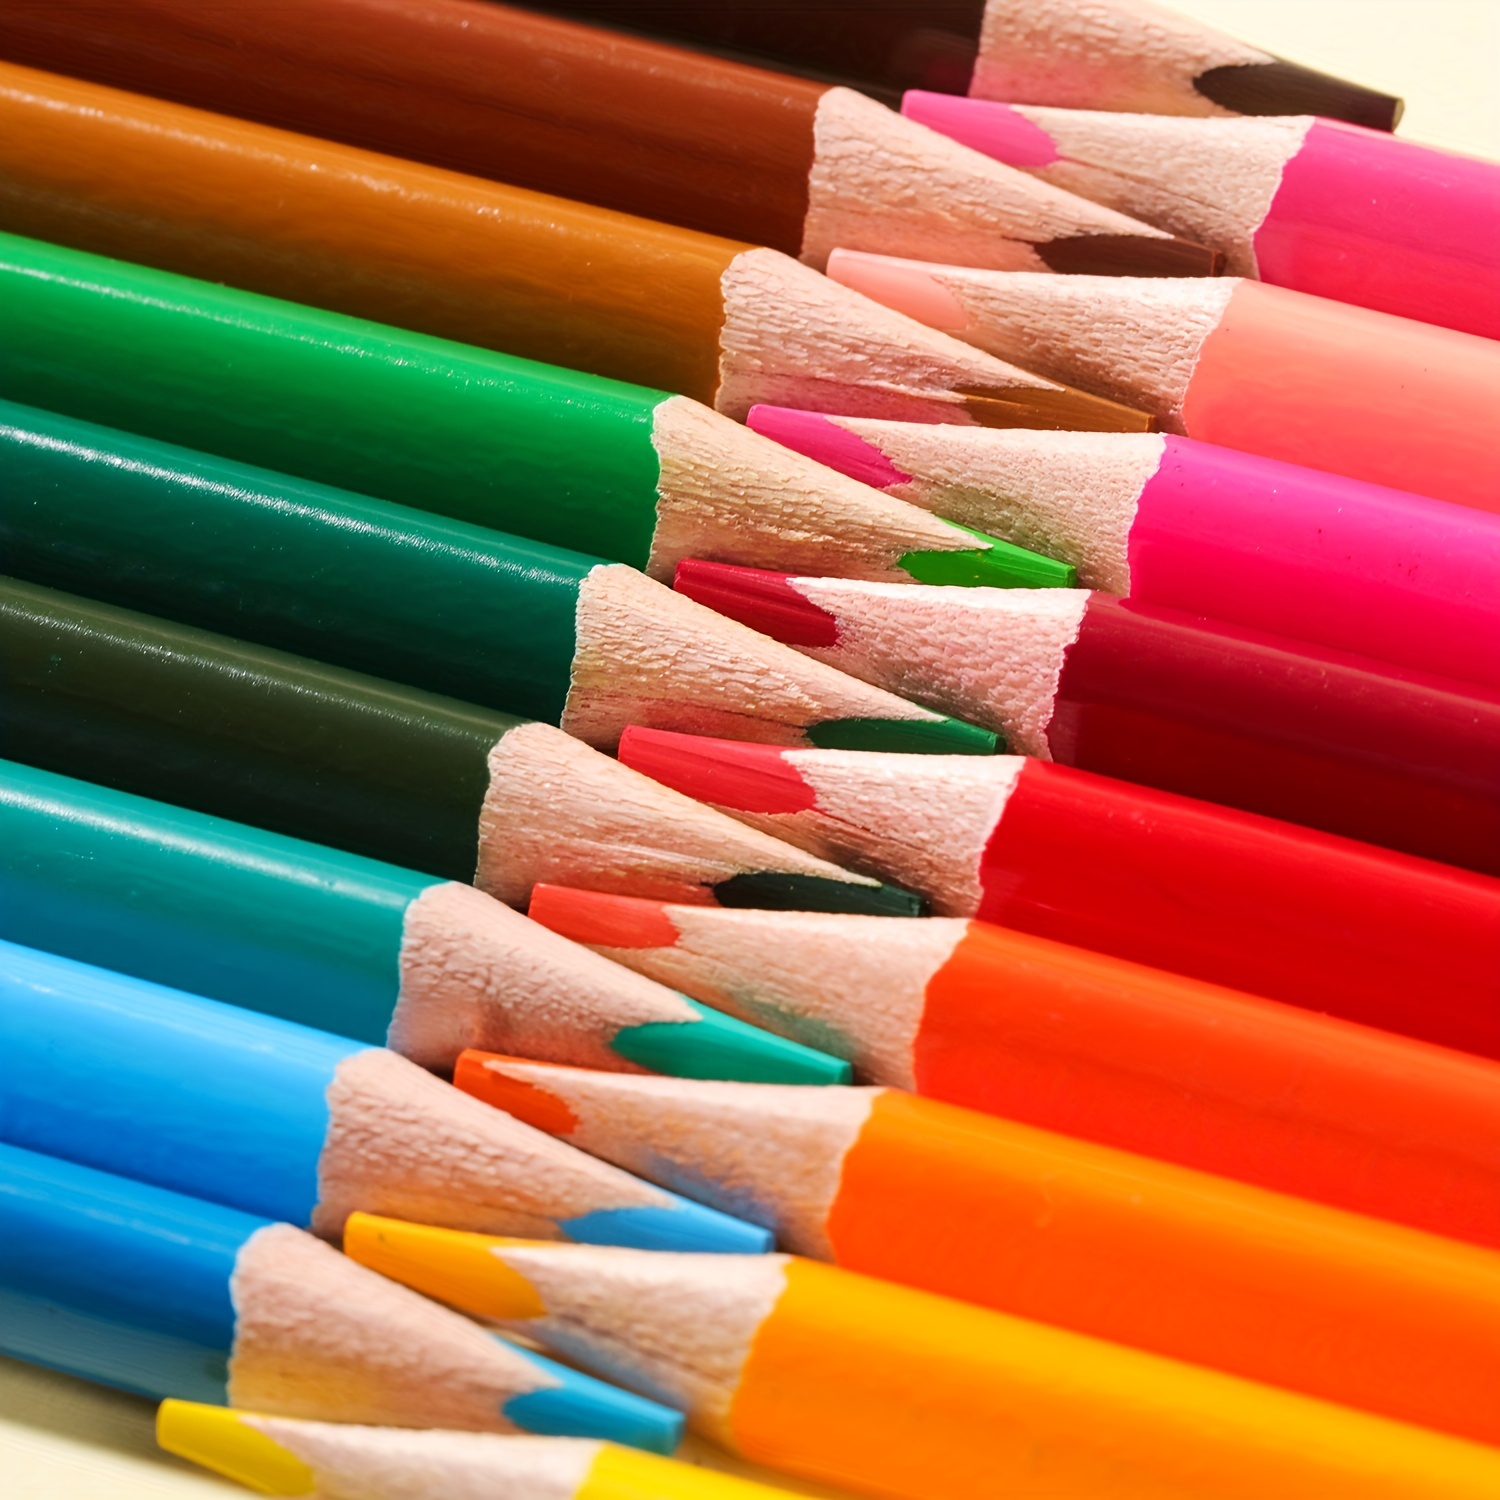 What is the best high quality colored pencil set for adult